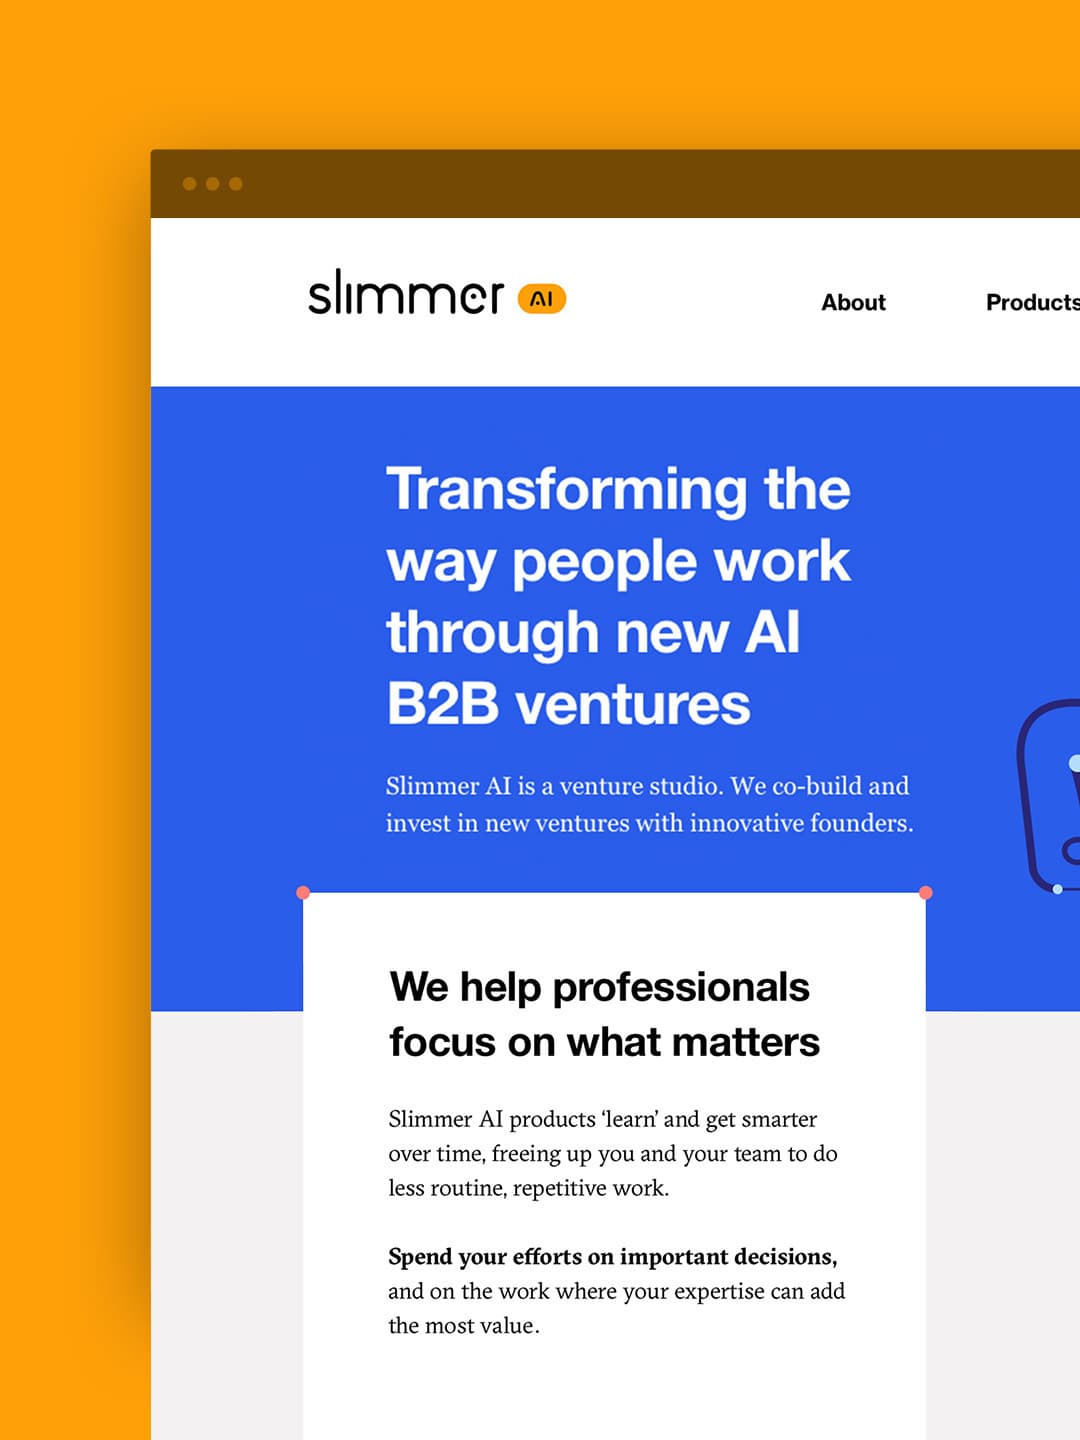 The clear Slimmer website was designed and developed in-house